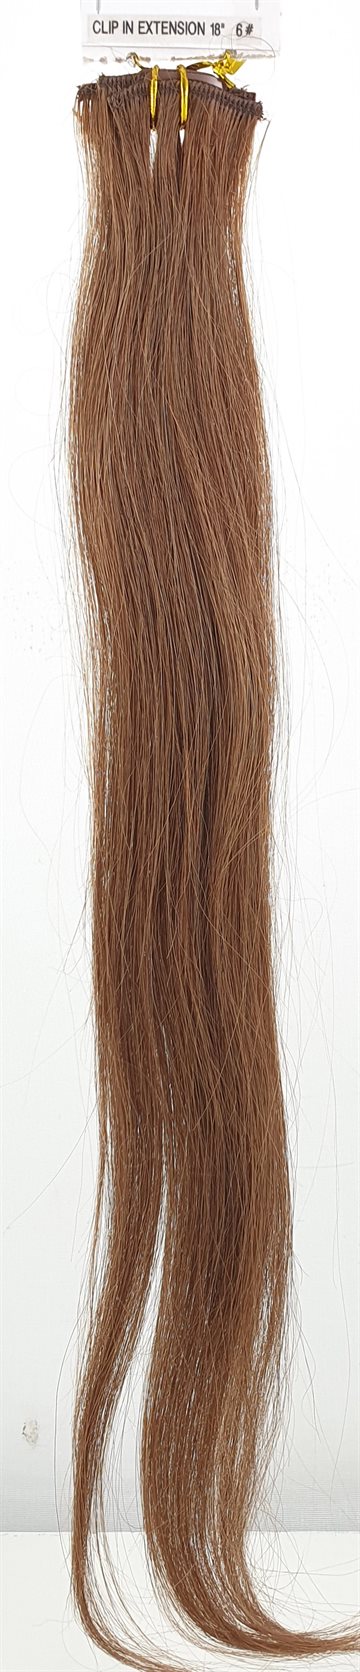 Human Hair - Clip in extention 18" color 6 - 20 gr.